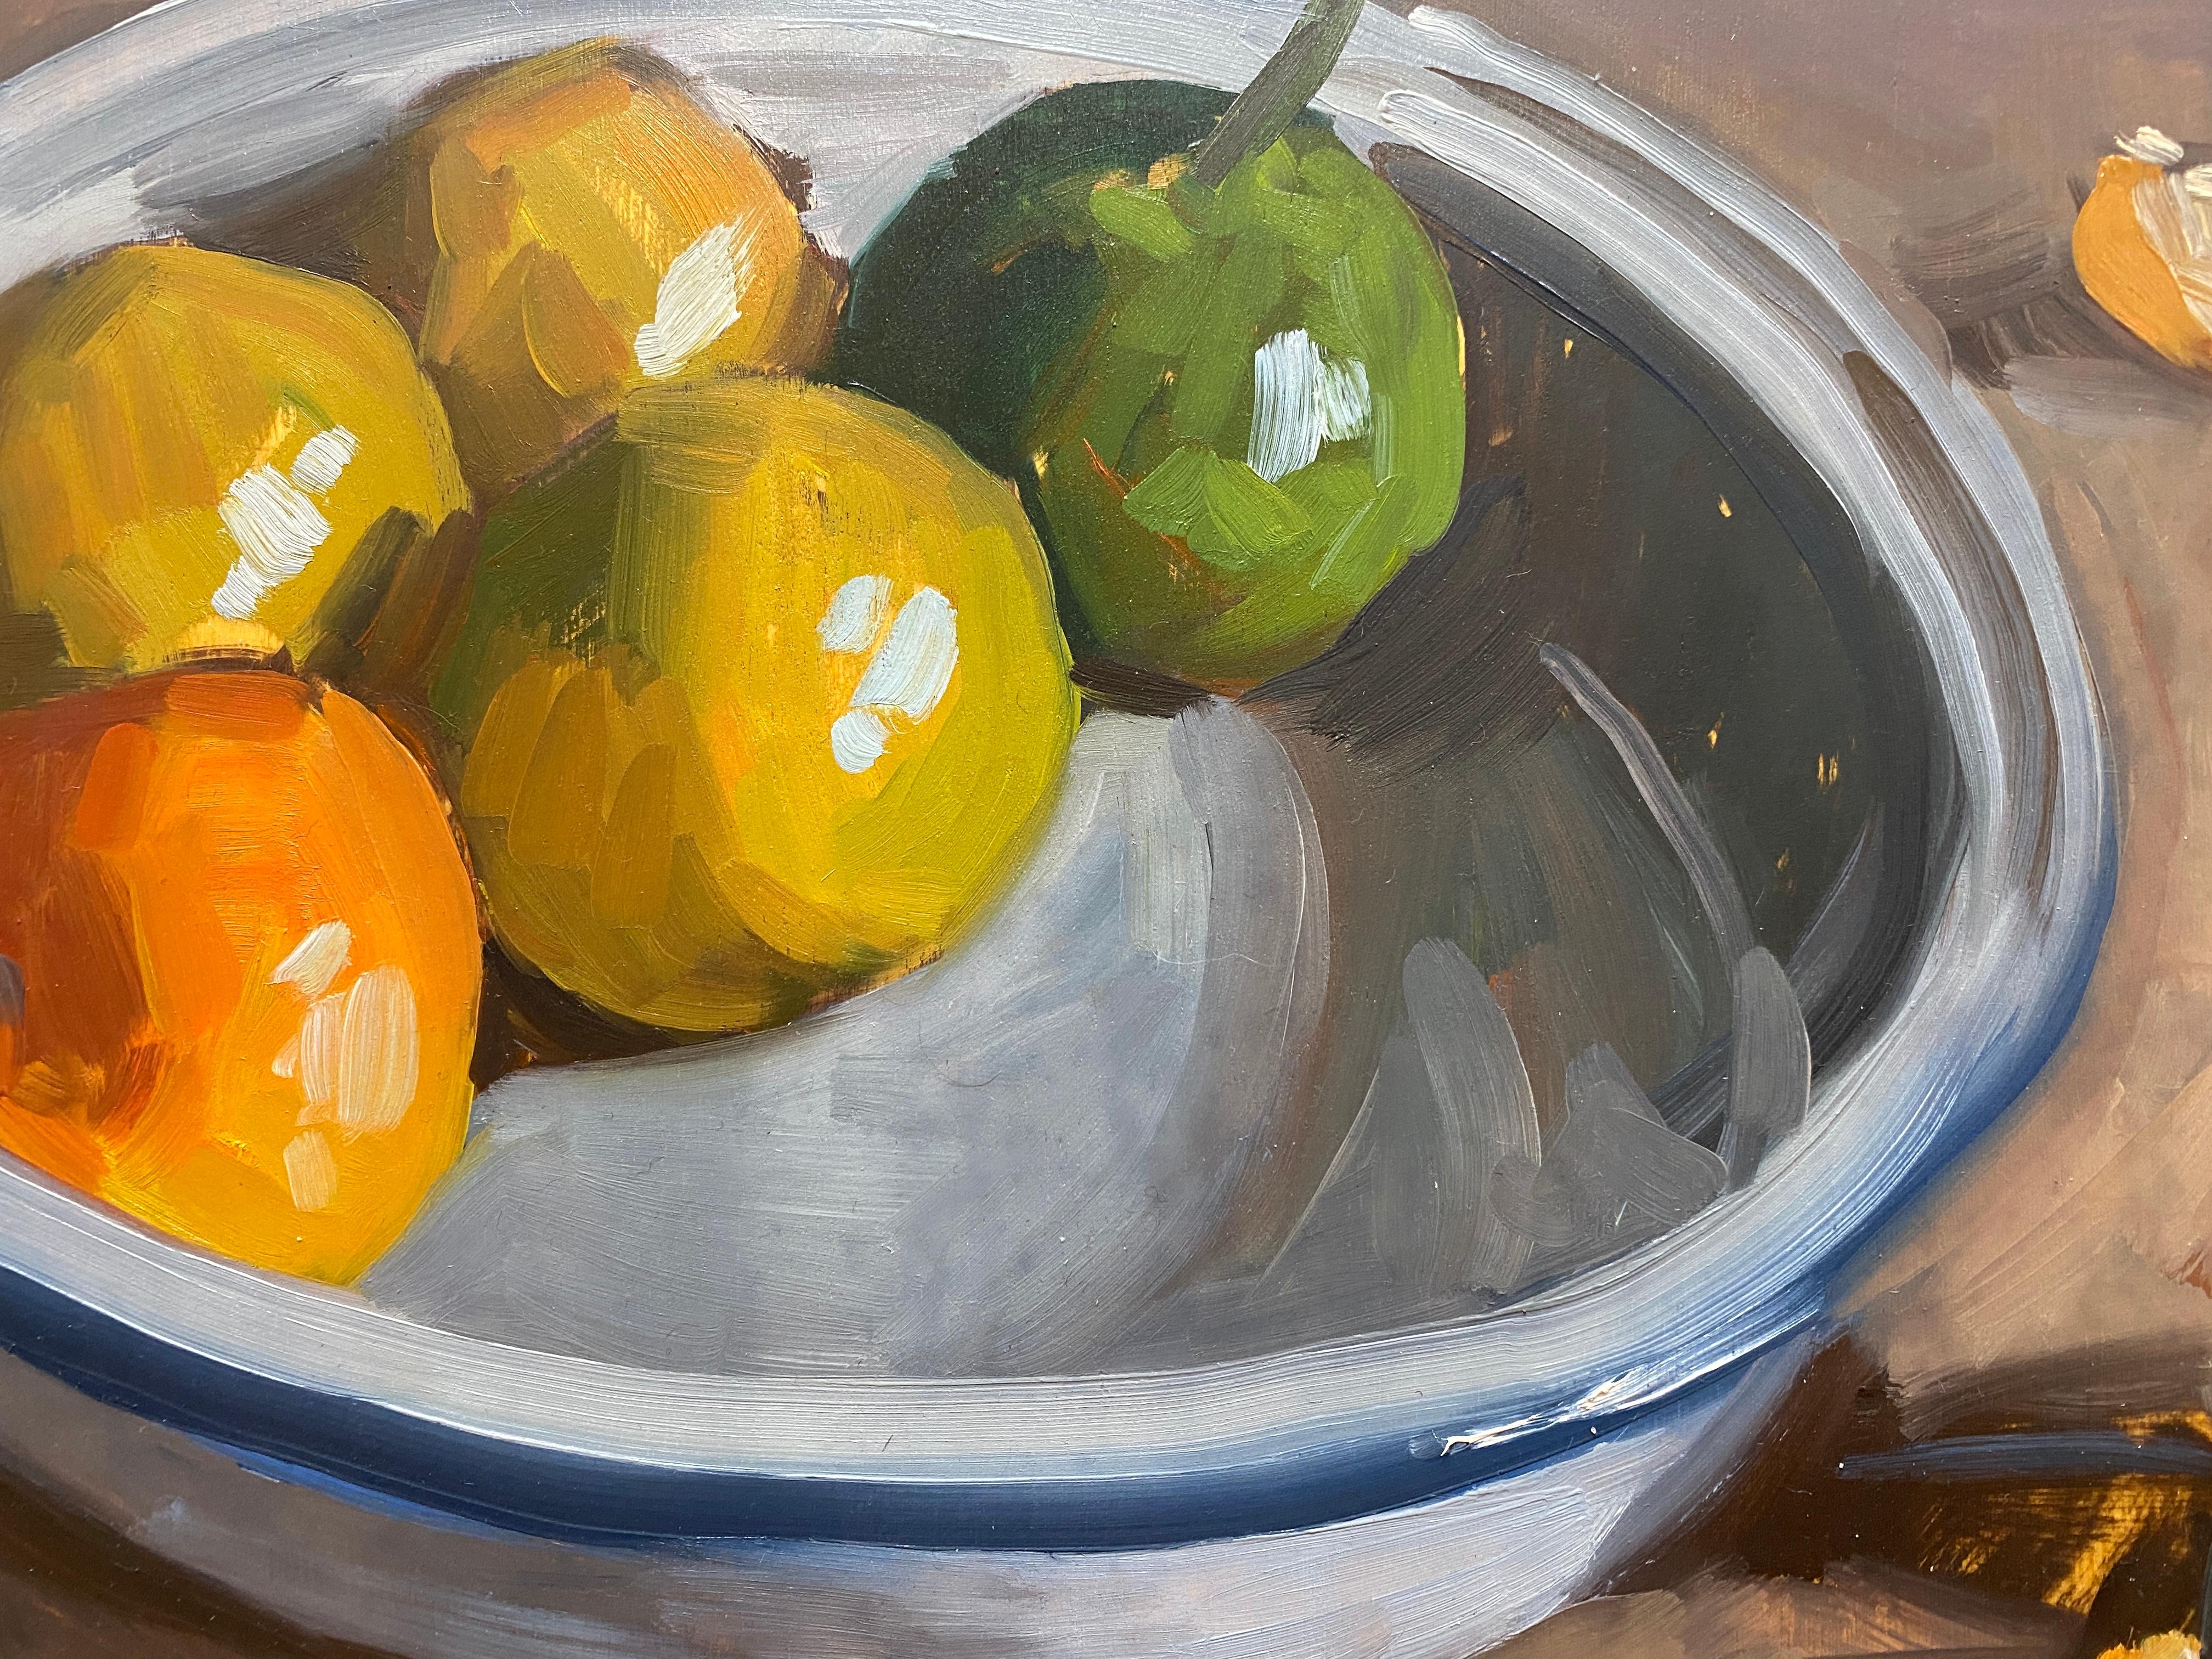 An impressive still life (oil on panel) of vibrant clementines in android white and blue dish.  The attention to detail and the striking ability to find the beautiful within the mundane is characteristic of this artist's work. Clementines are peeled